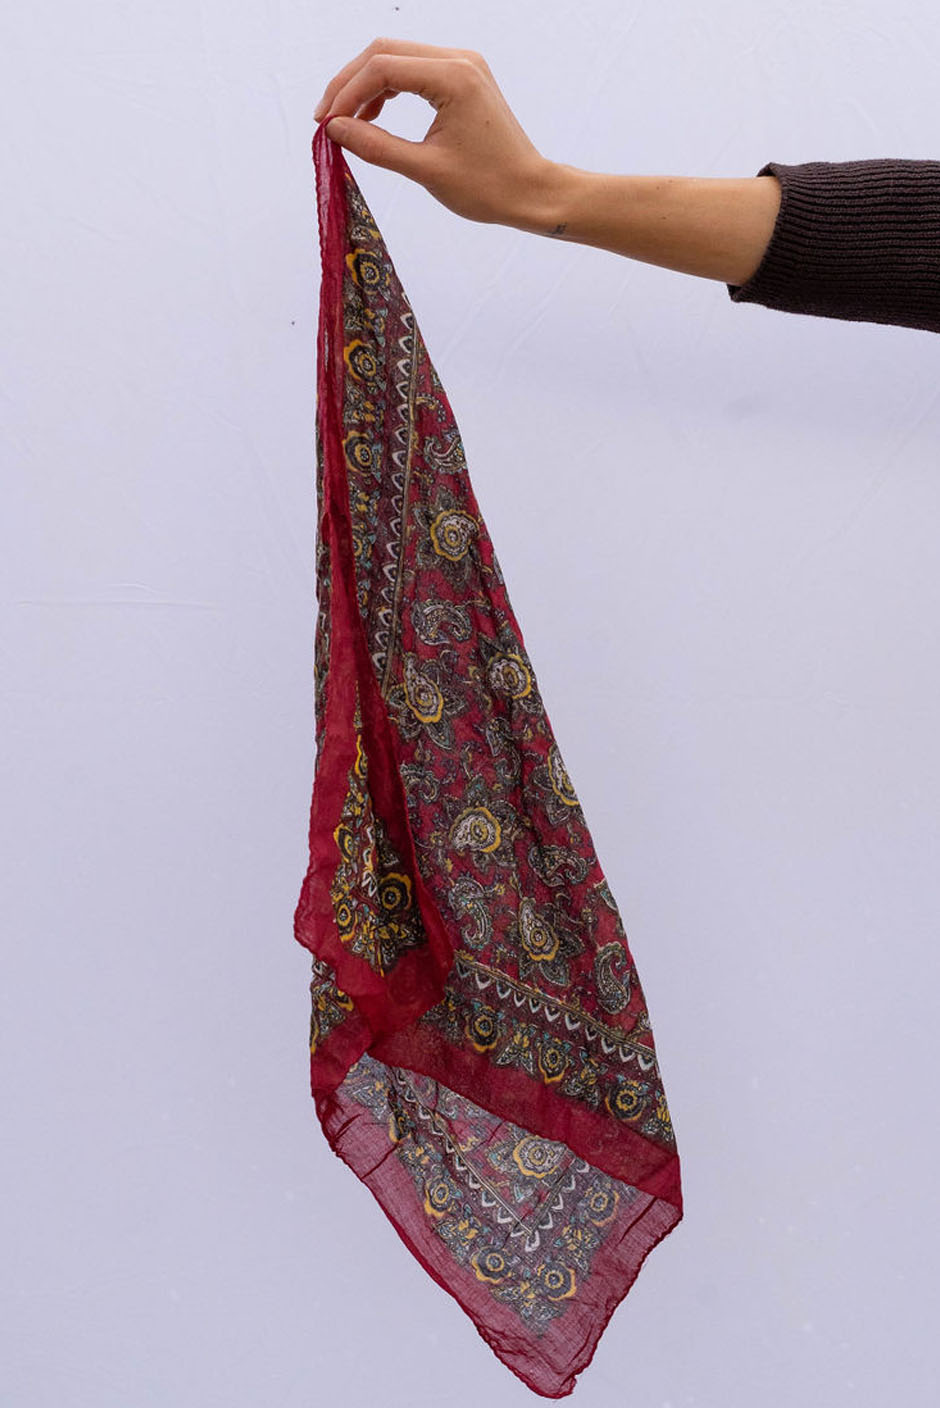 Vintage Freya bandana in Berry Red handcrafted in India Featuring a multicolor paisley print for women by Panero Clothing. Full view.